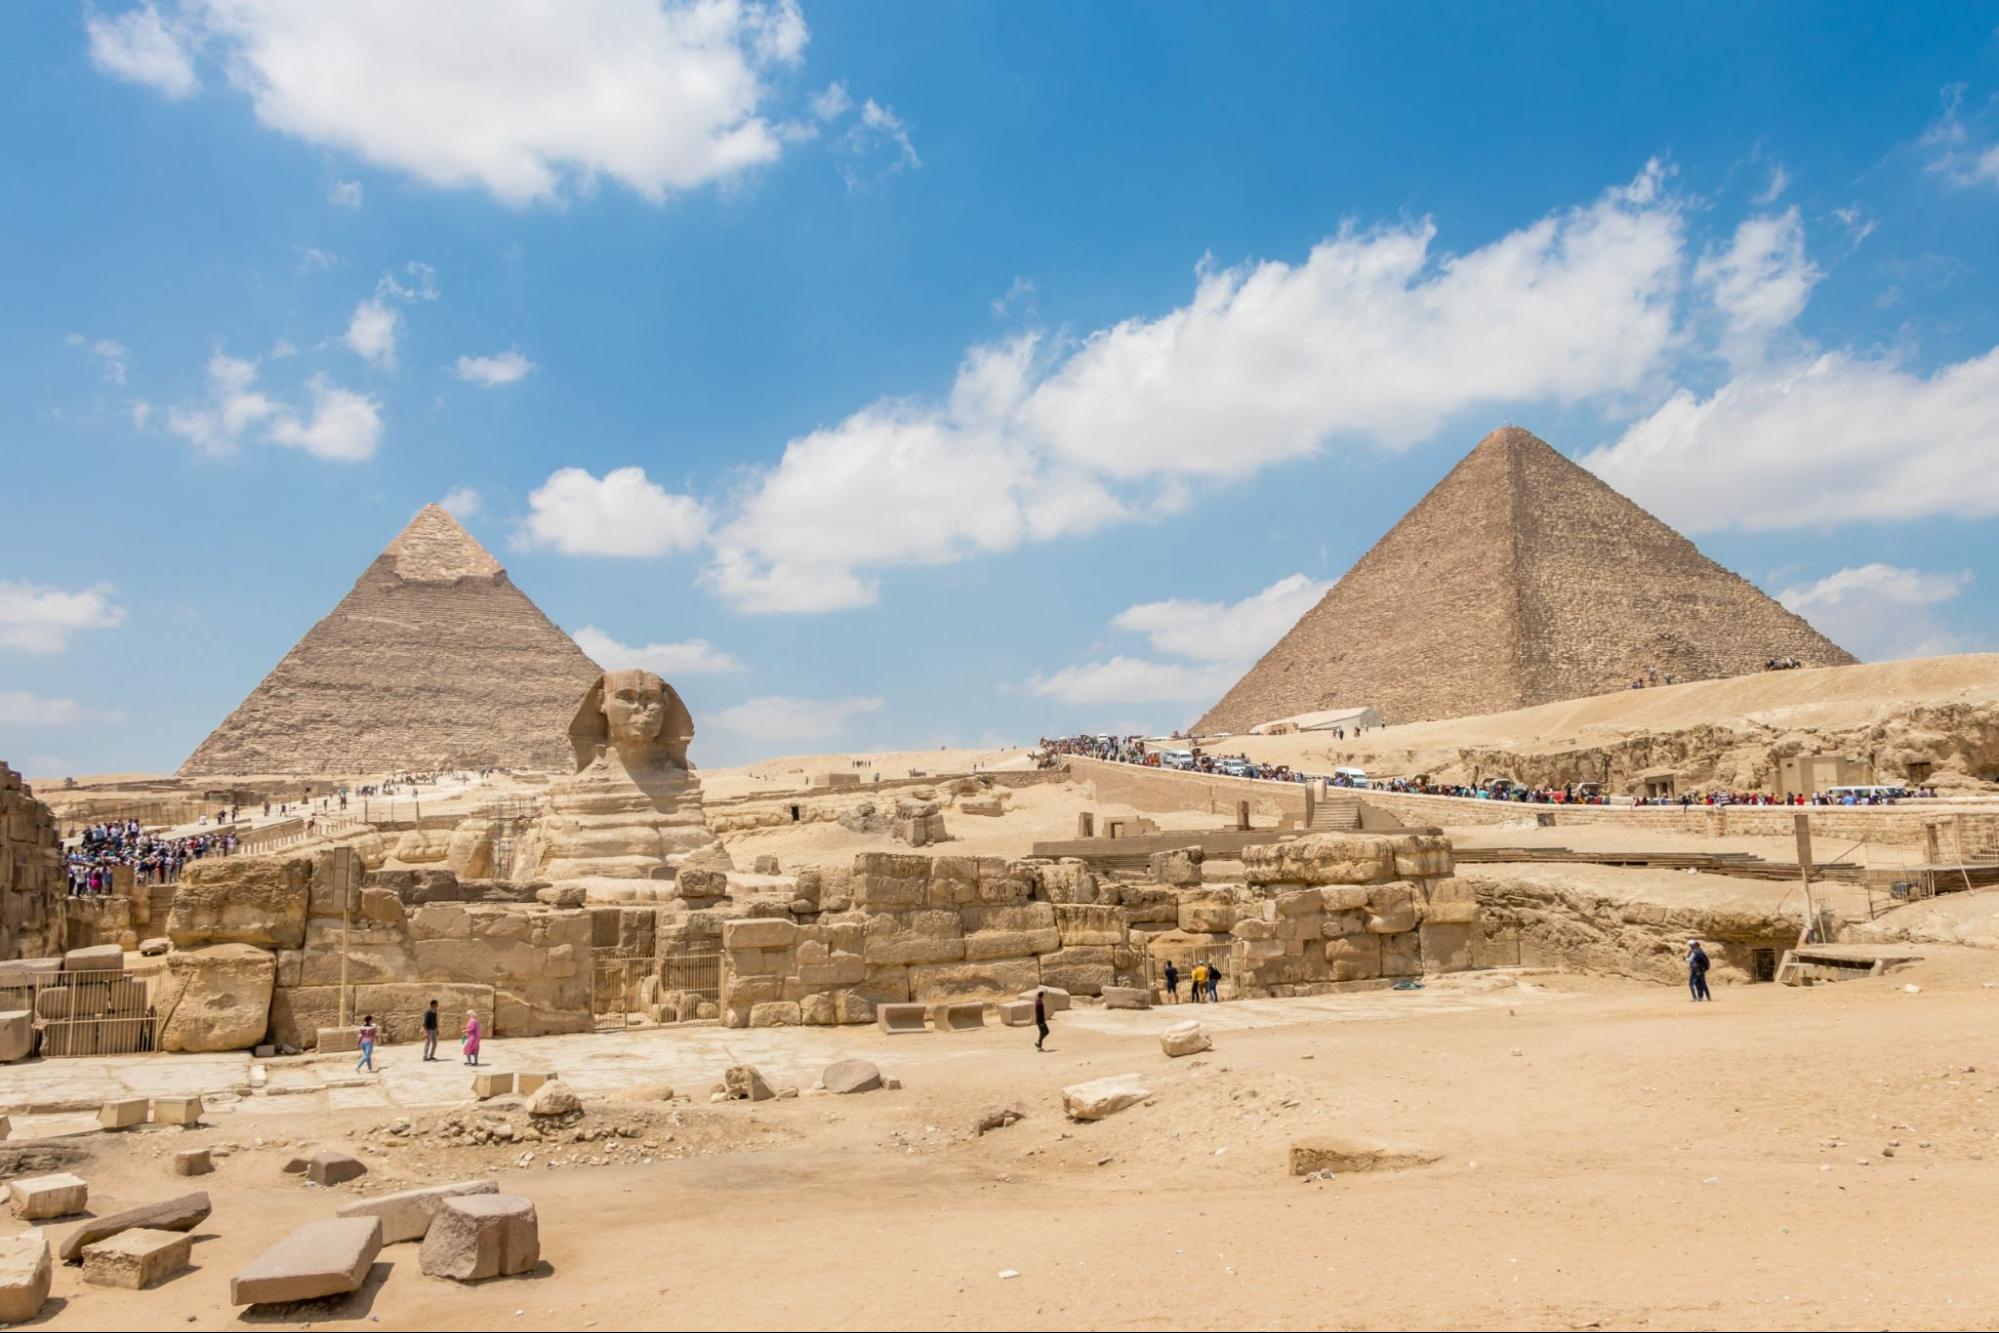 The pyramid of Khafre, Khufu and the Great Sphinx of Giza